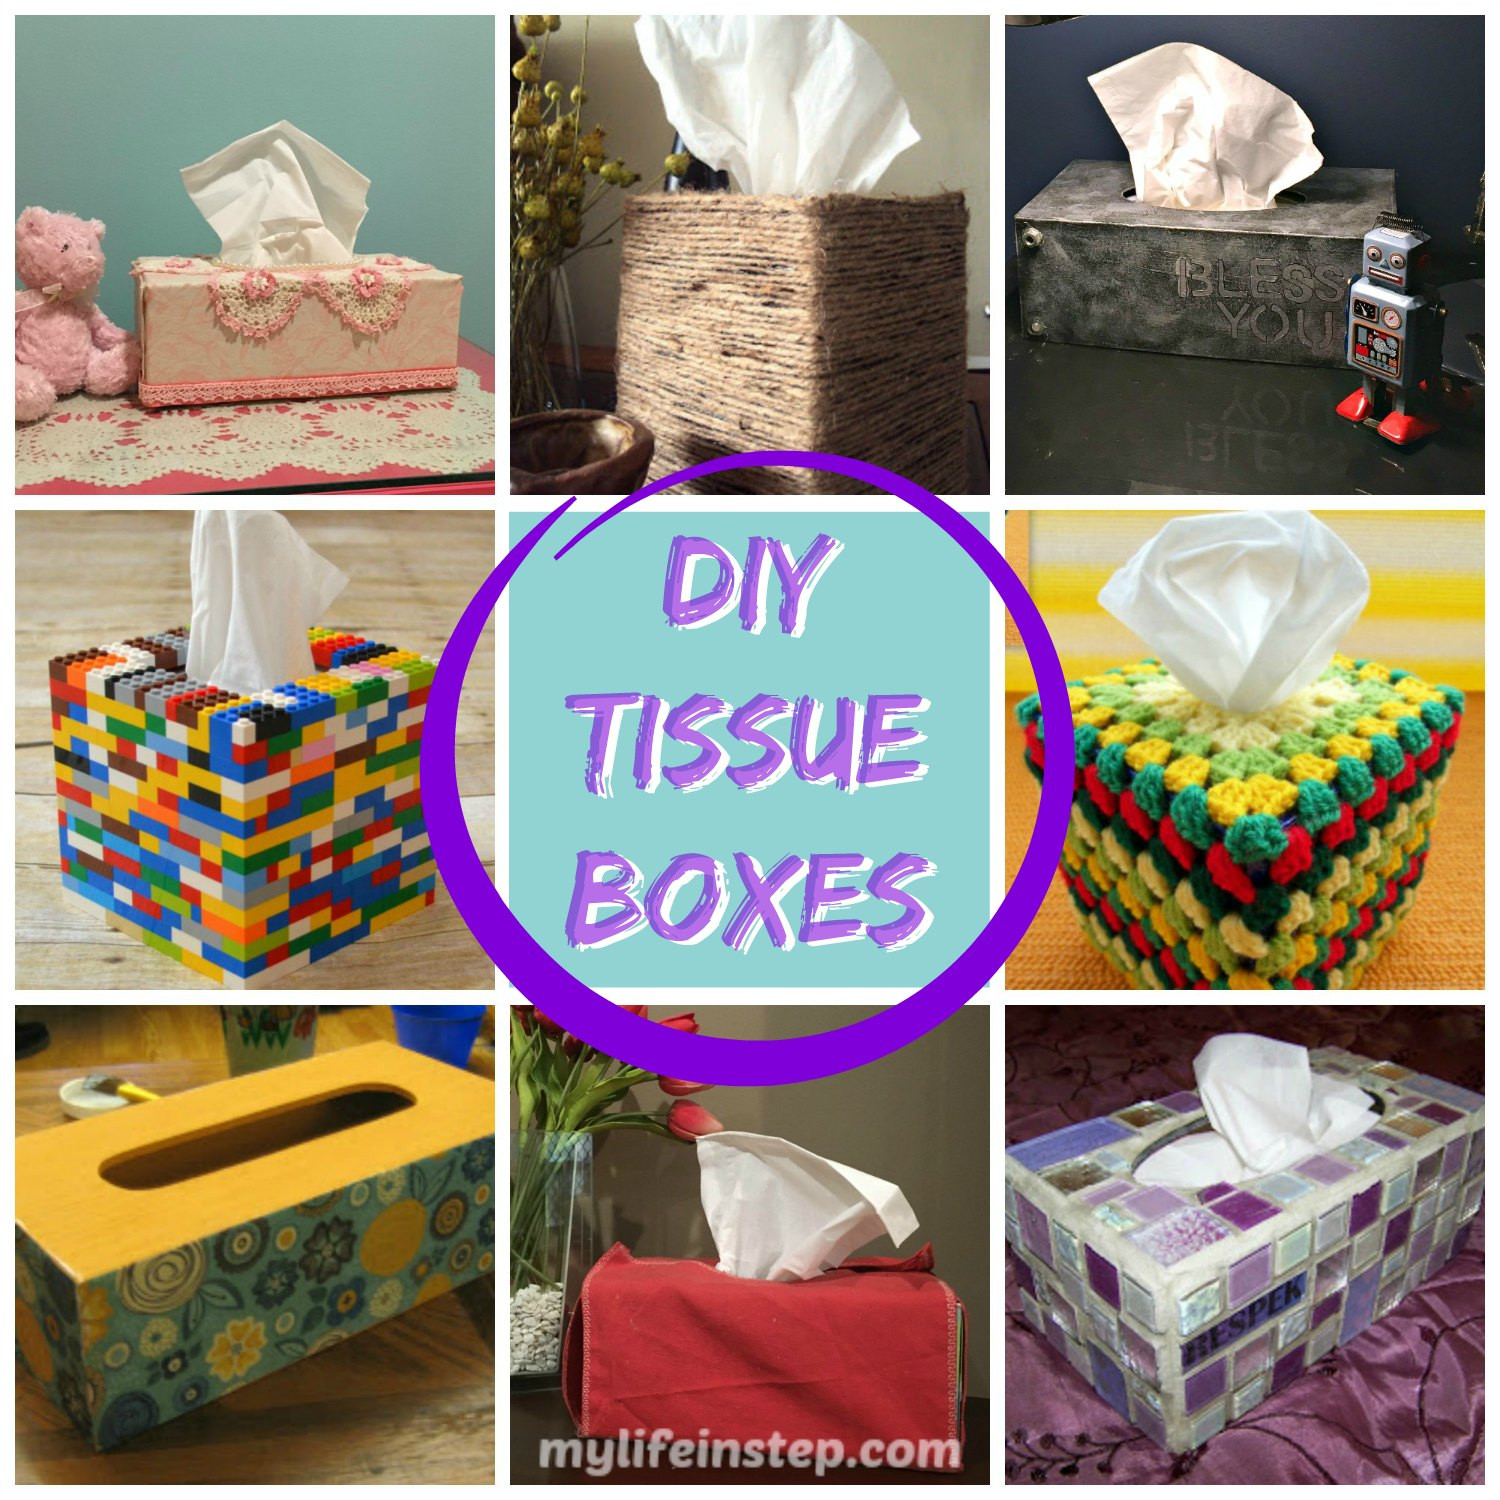 Kleenex Box Covers DIY
 8 easy DIY Tissue Box Covers Jazz up the rooms in your